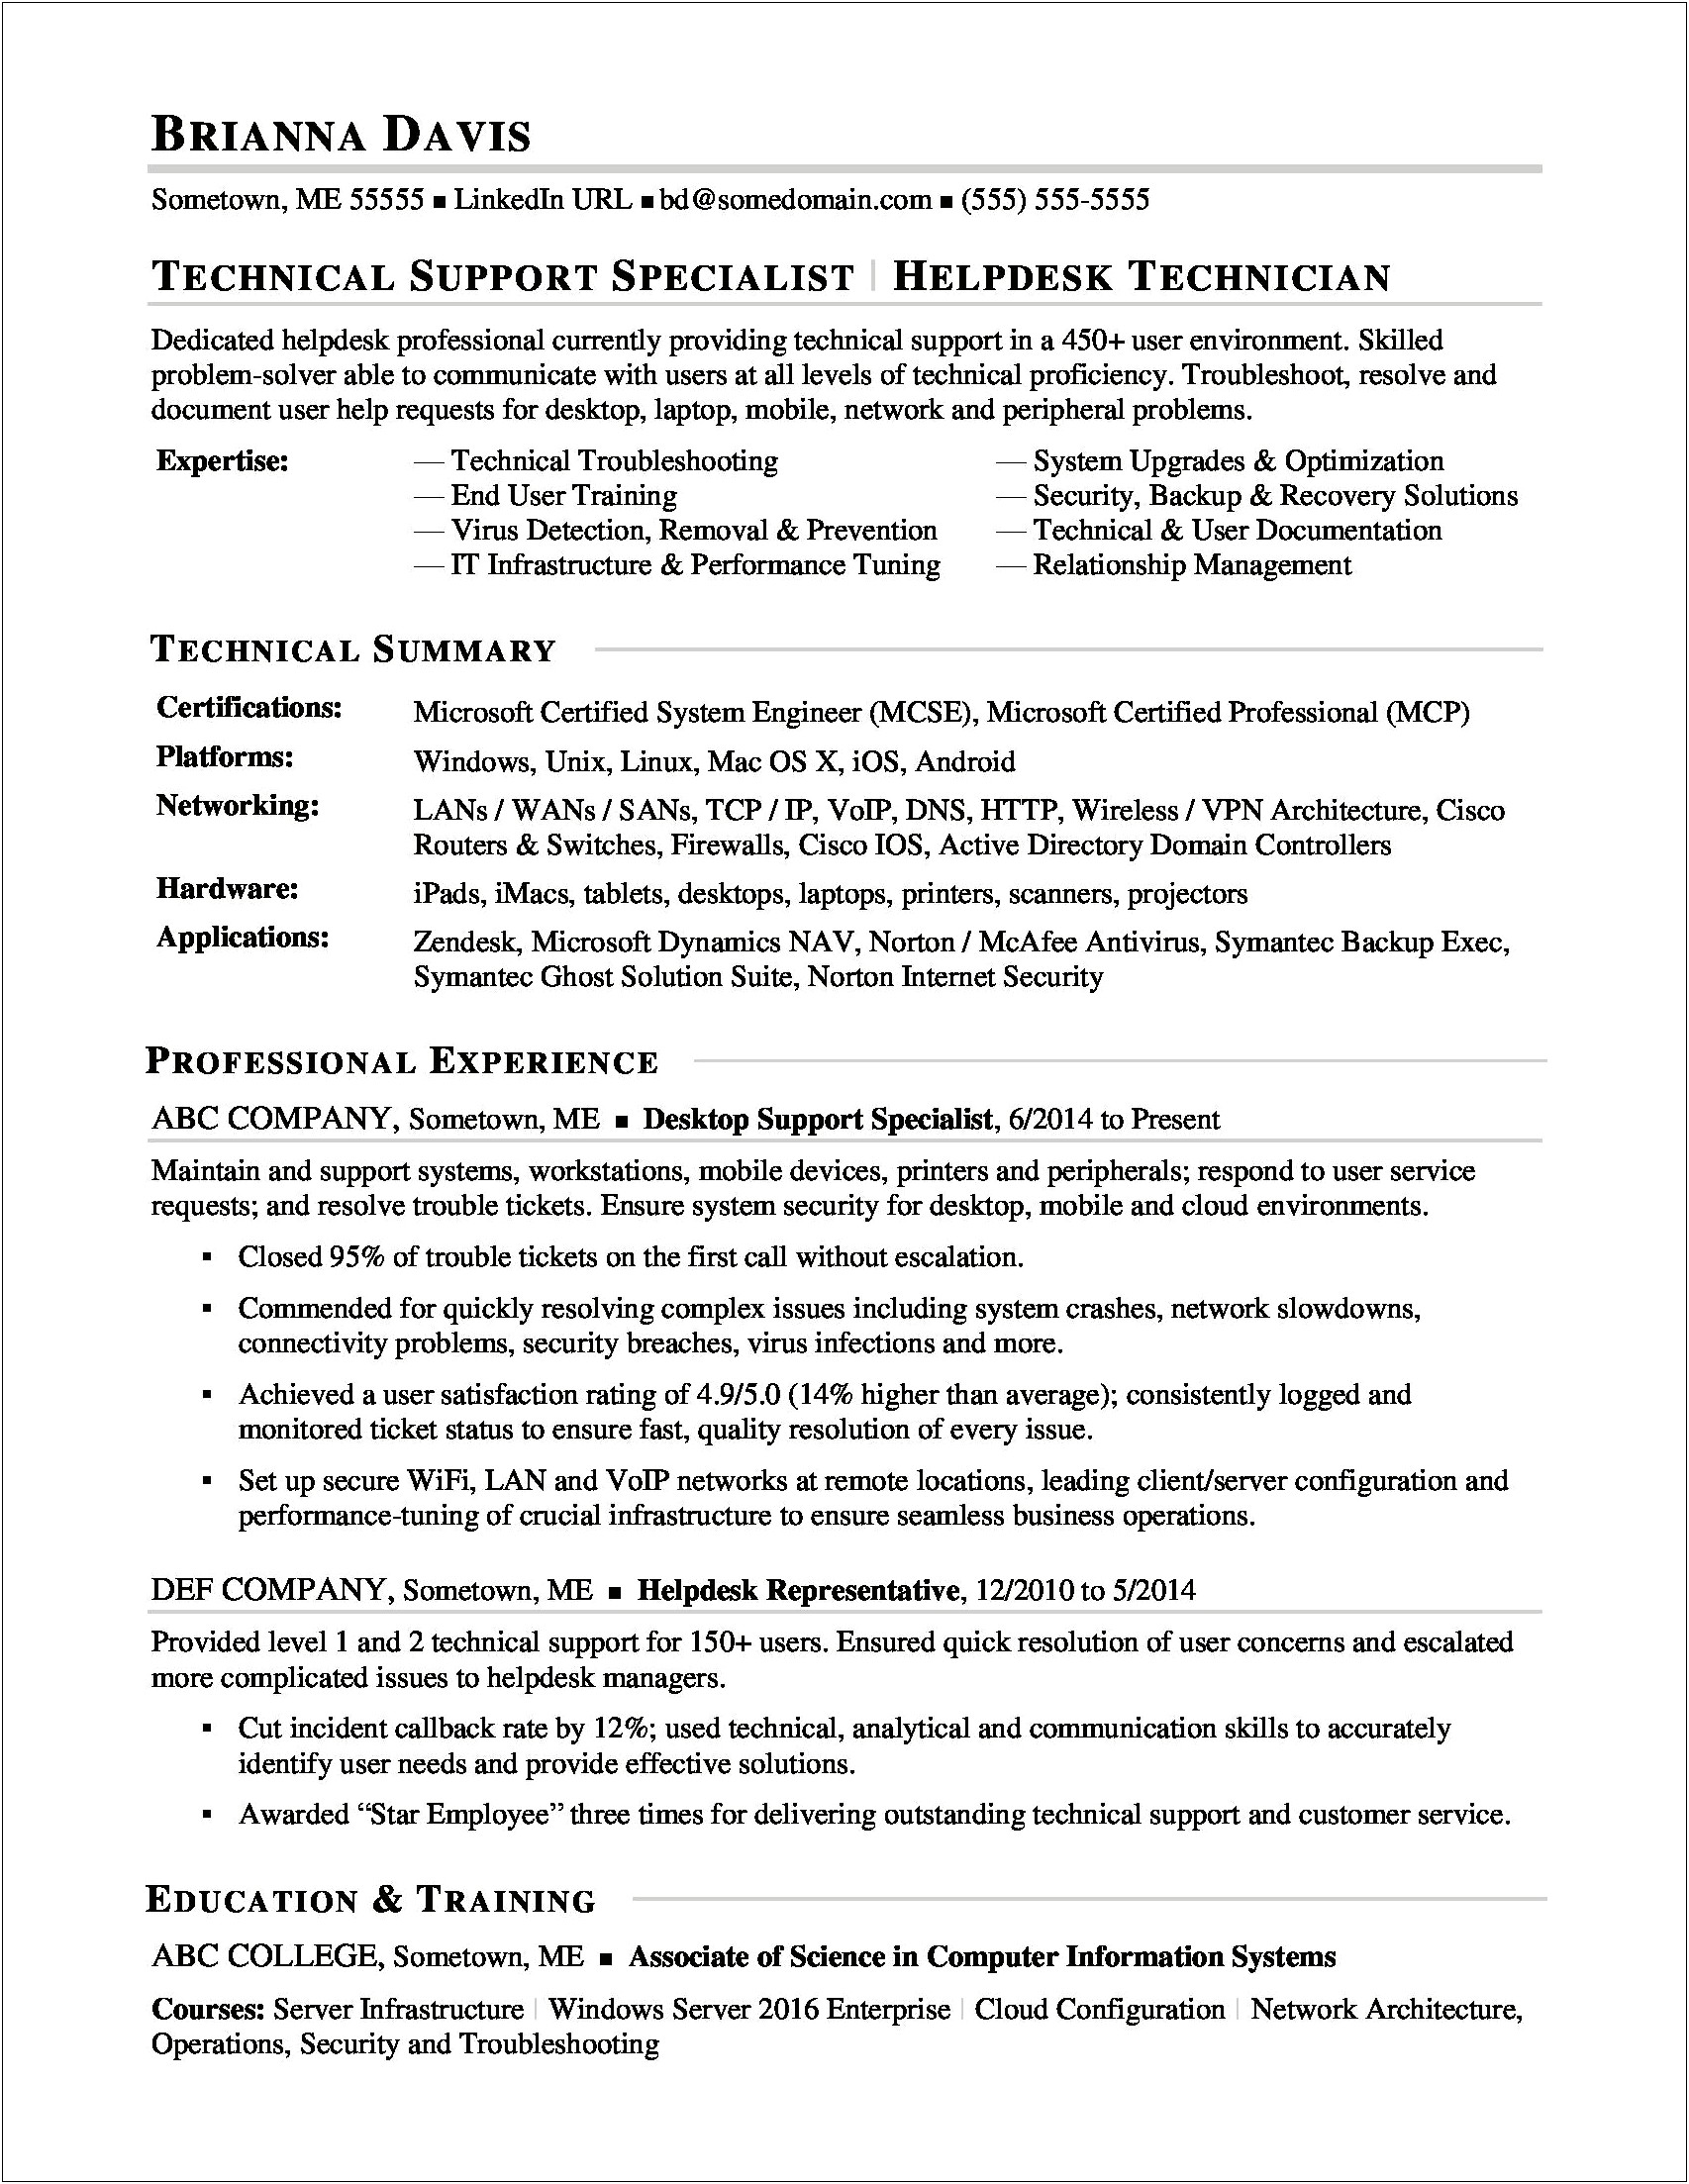 Skills And Special Training For Resume